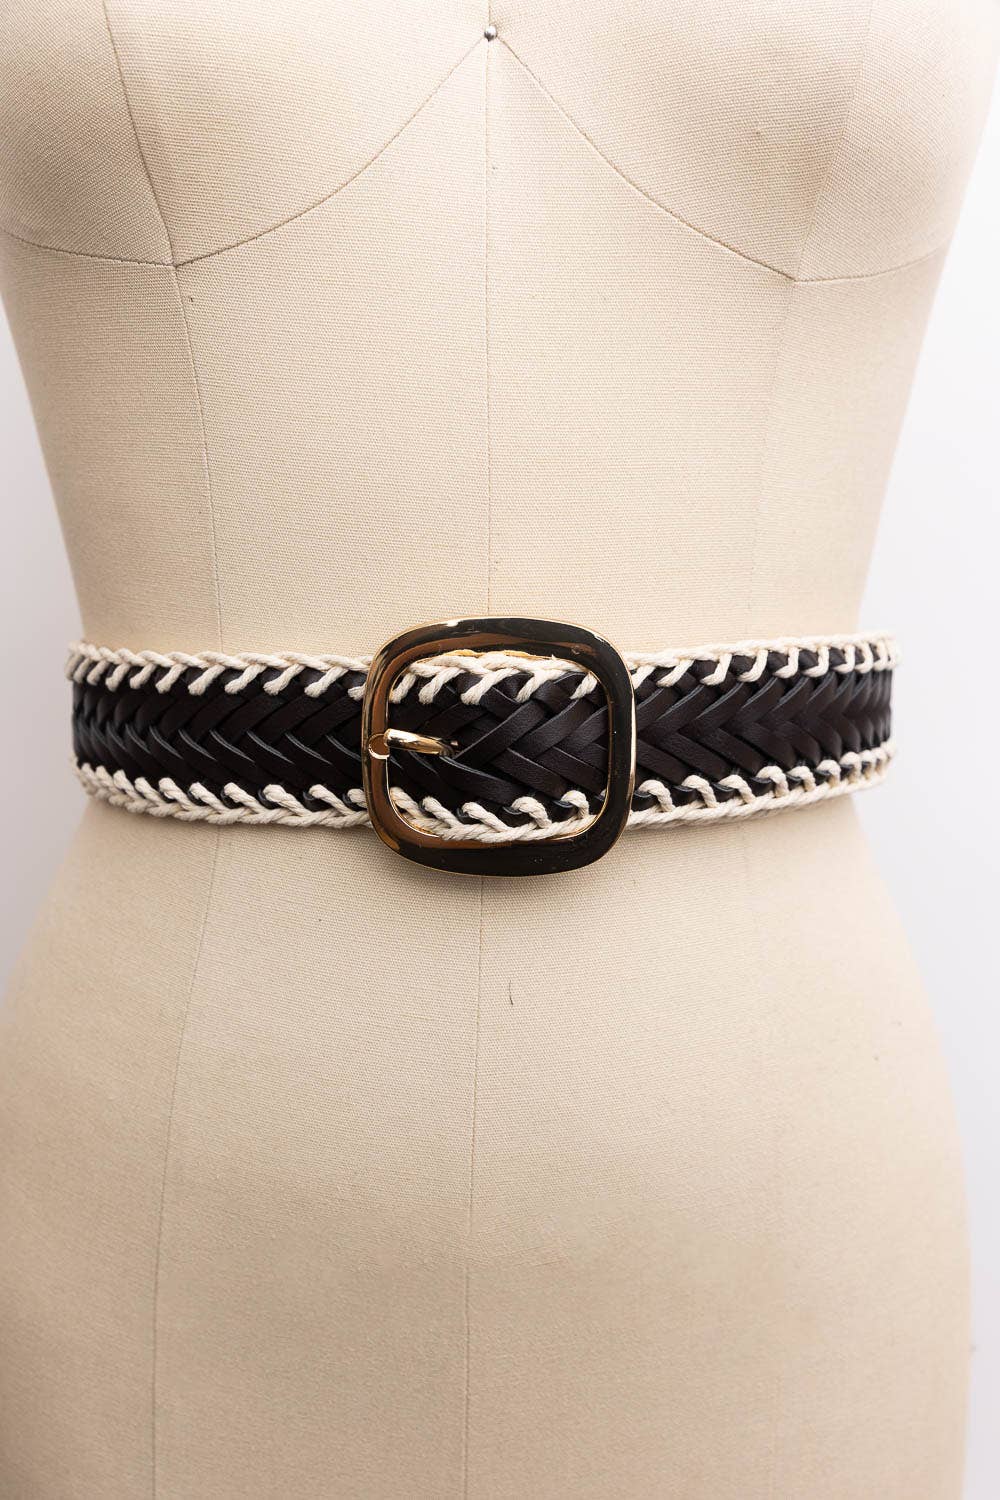 Leto Accessories Crochet Trimmed Woven Leather Belt: Black - Simple Good